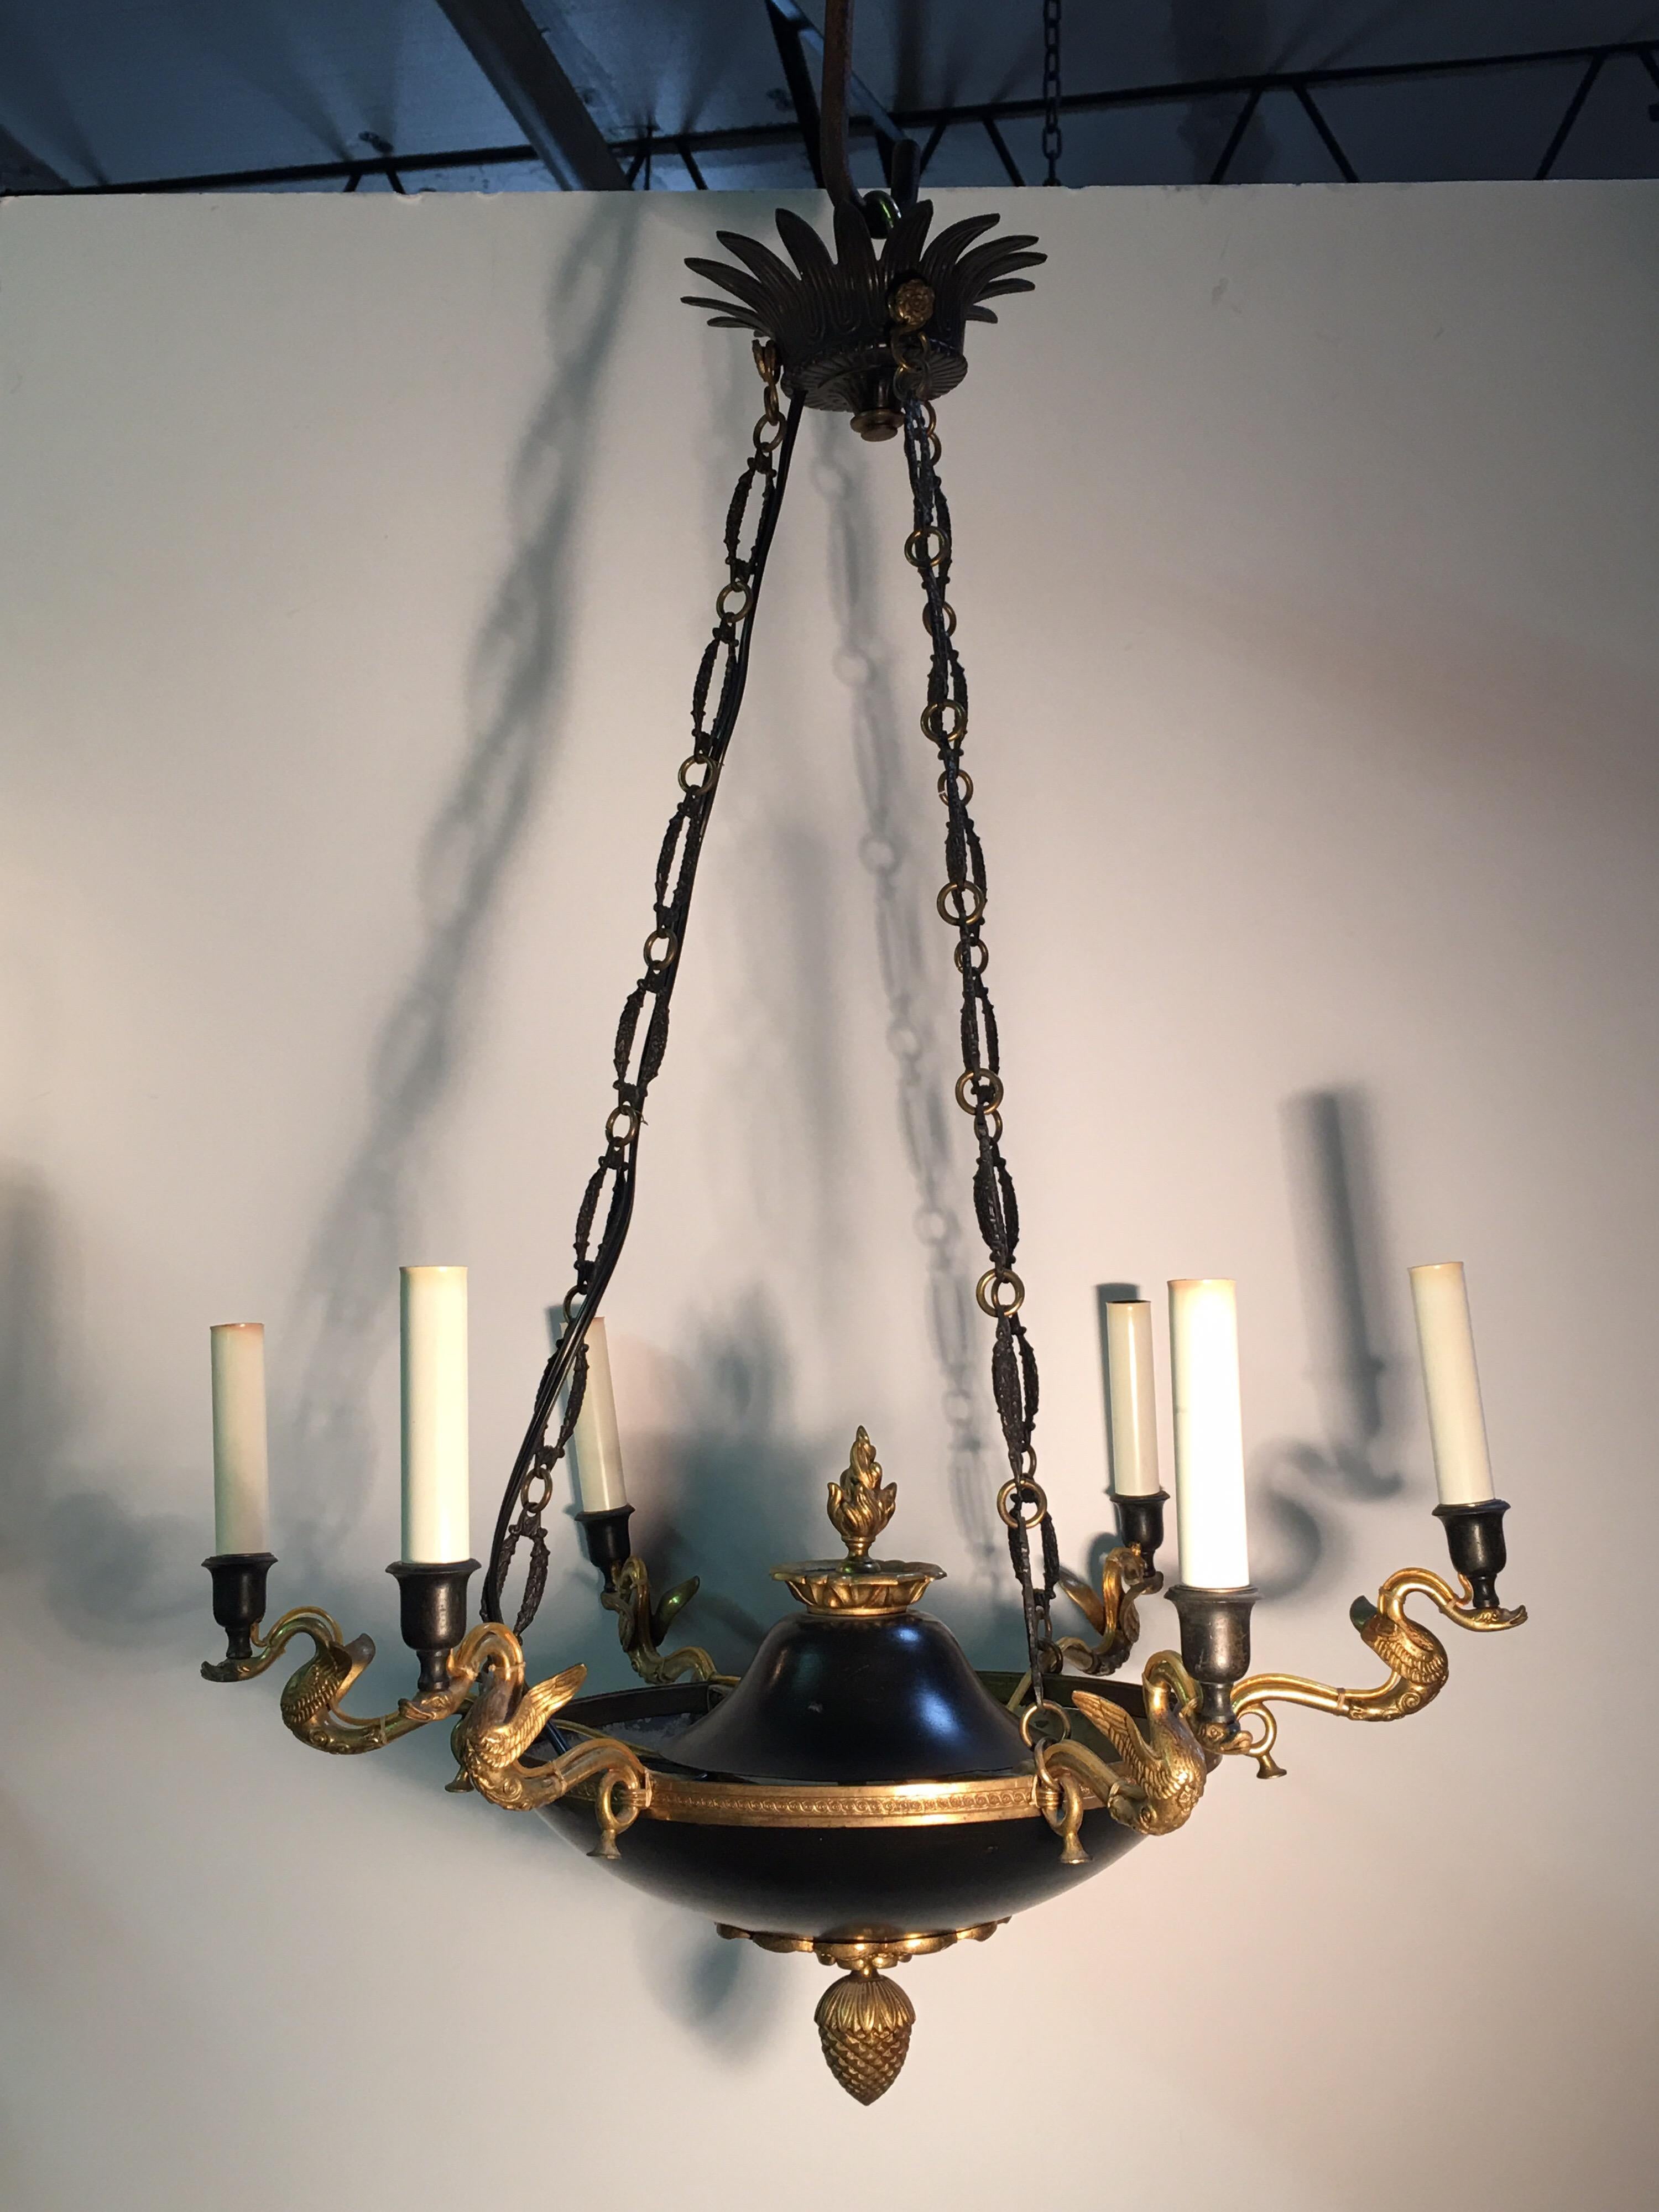 A French Empire style bronze chandelier.